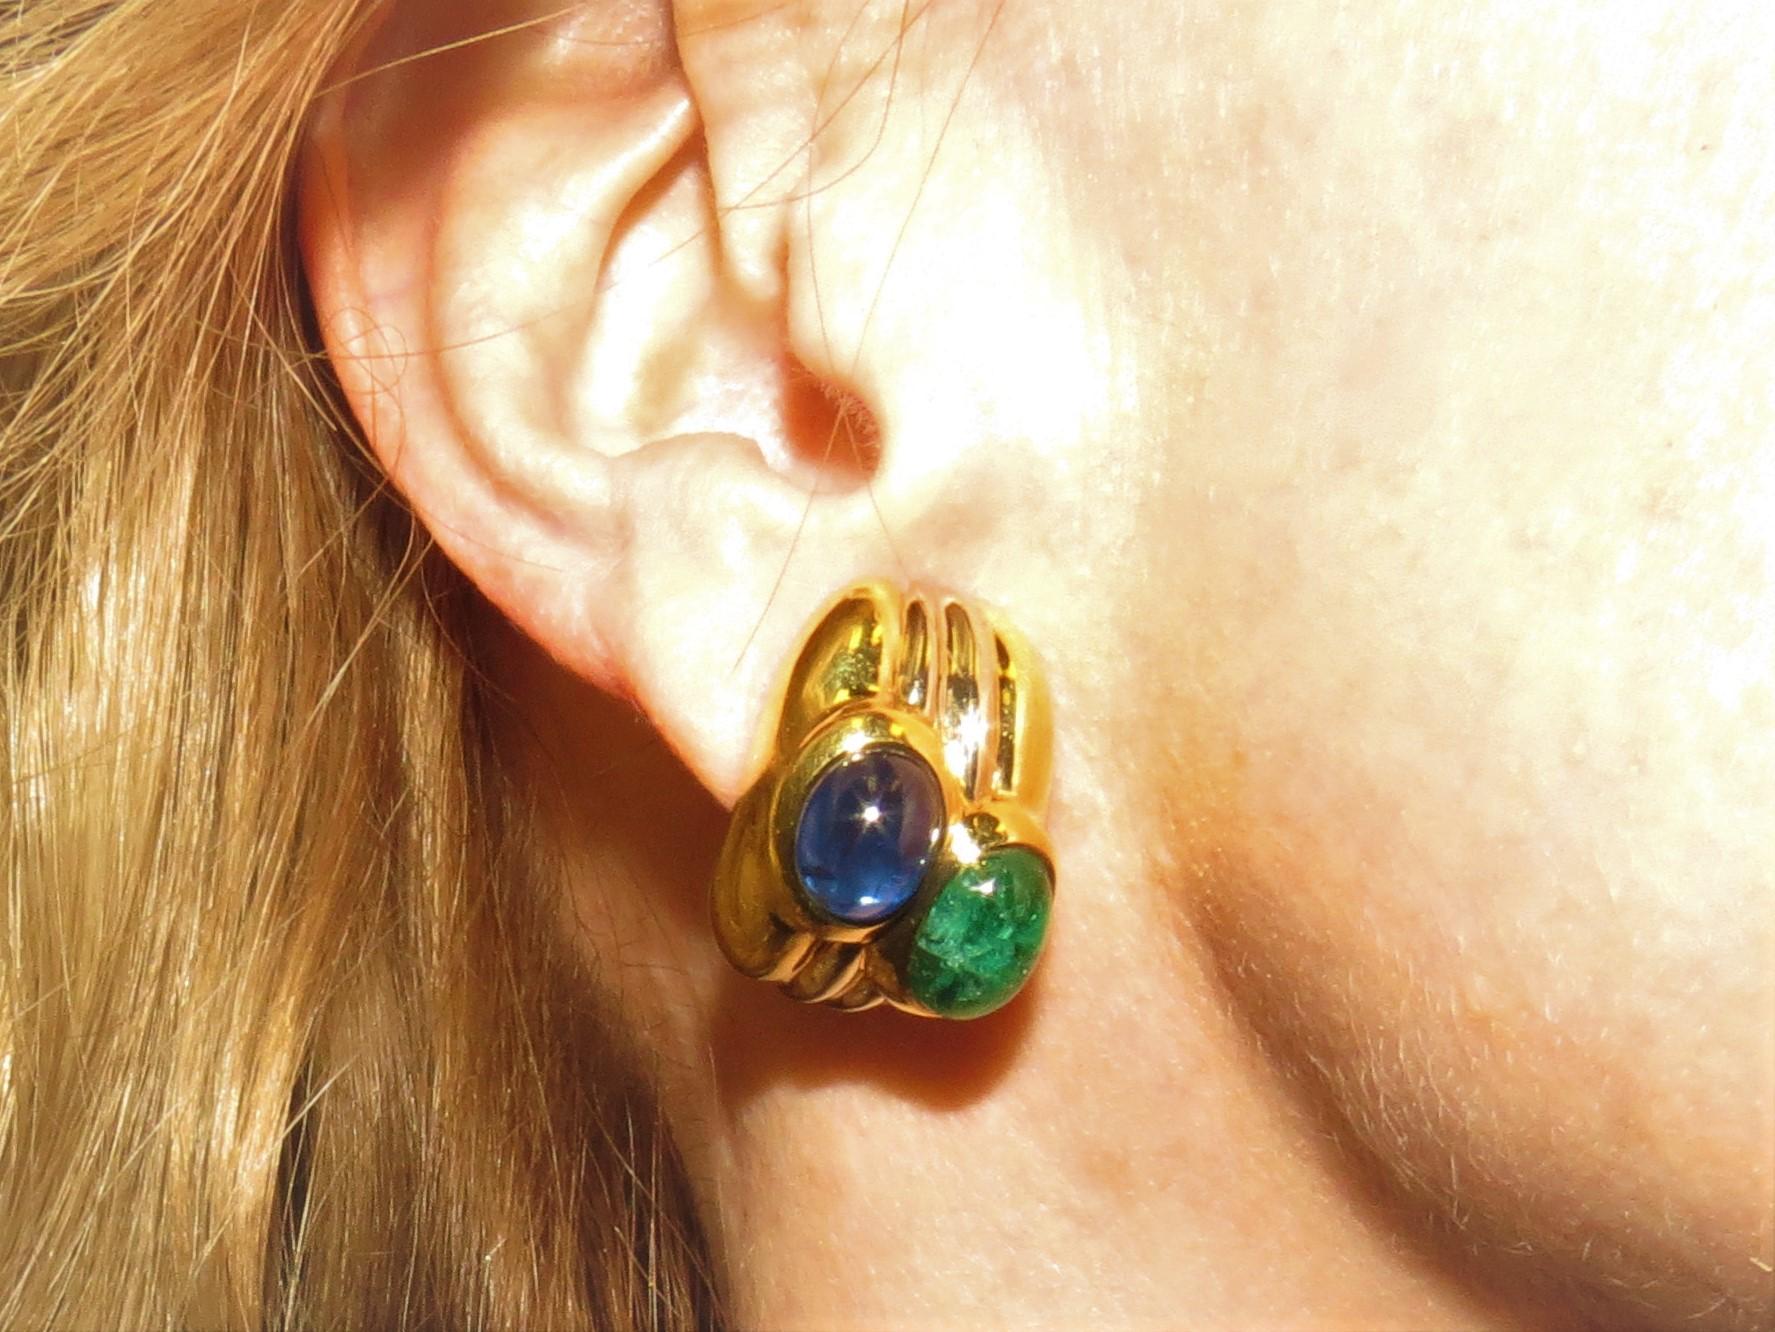 18K yellow gold earclips, by Giovanne, set with 2 oval cabochon blue sapphires and two oval emeralds weighing 14.89cts total.
Retail 11,500